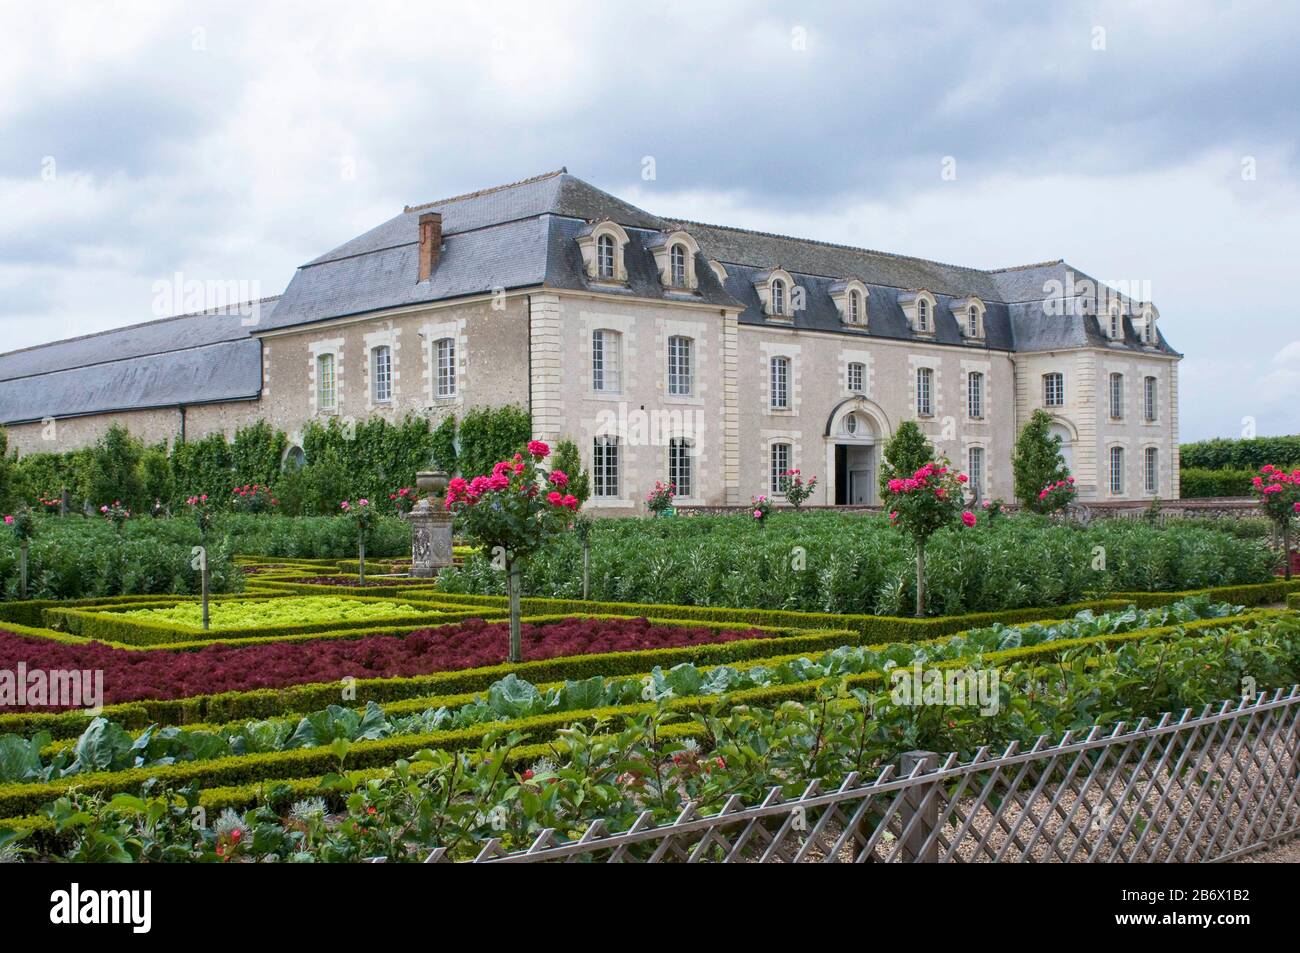 The Chateau de Villandry is a grand country house in the Loire region best known for its fabulous garden. Stock Photo